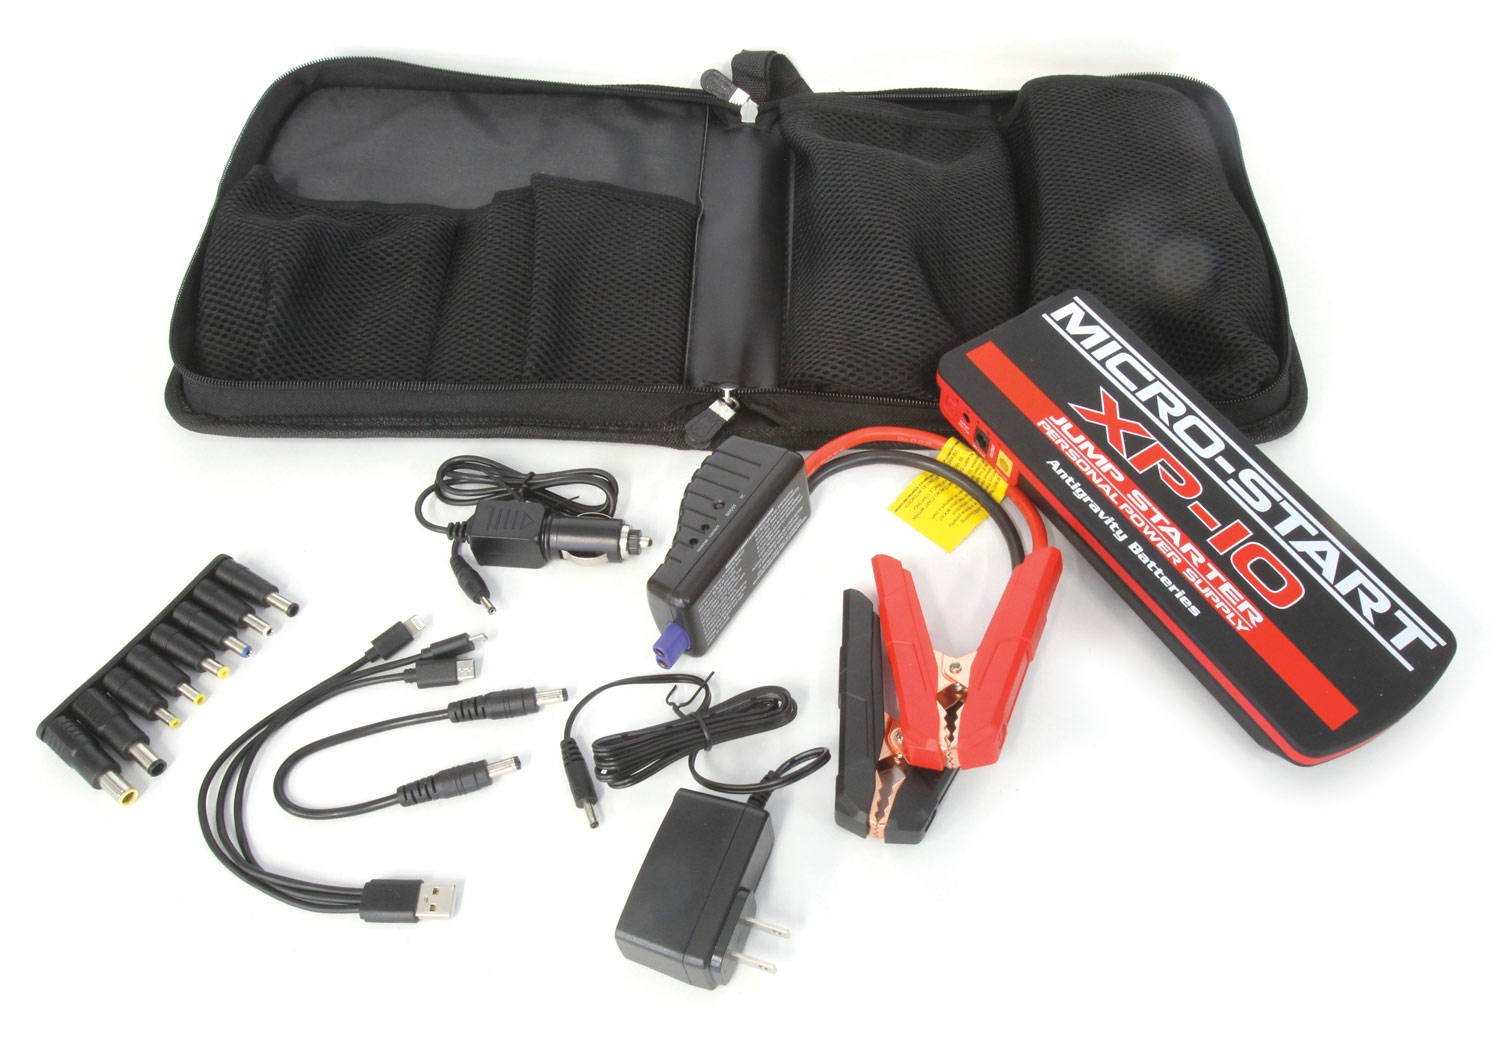 the Micro-Start XP-10 kit including the battery pack, specific jumper cables with 6 AWG cables, adapters to charge numerous laptops and cell phones, along with a home charging adapter and cigarette lighter adapter to charge the unit in the car